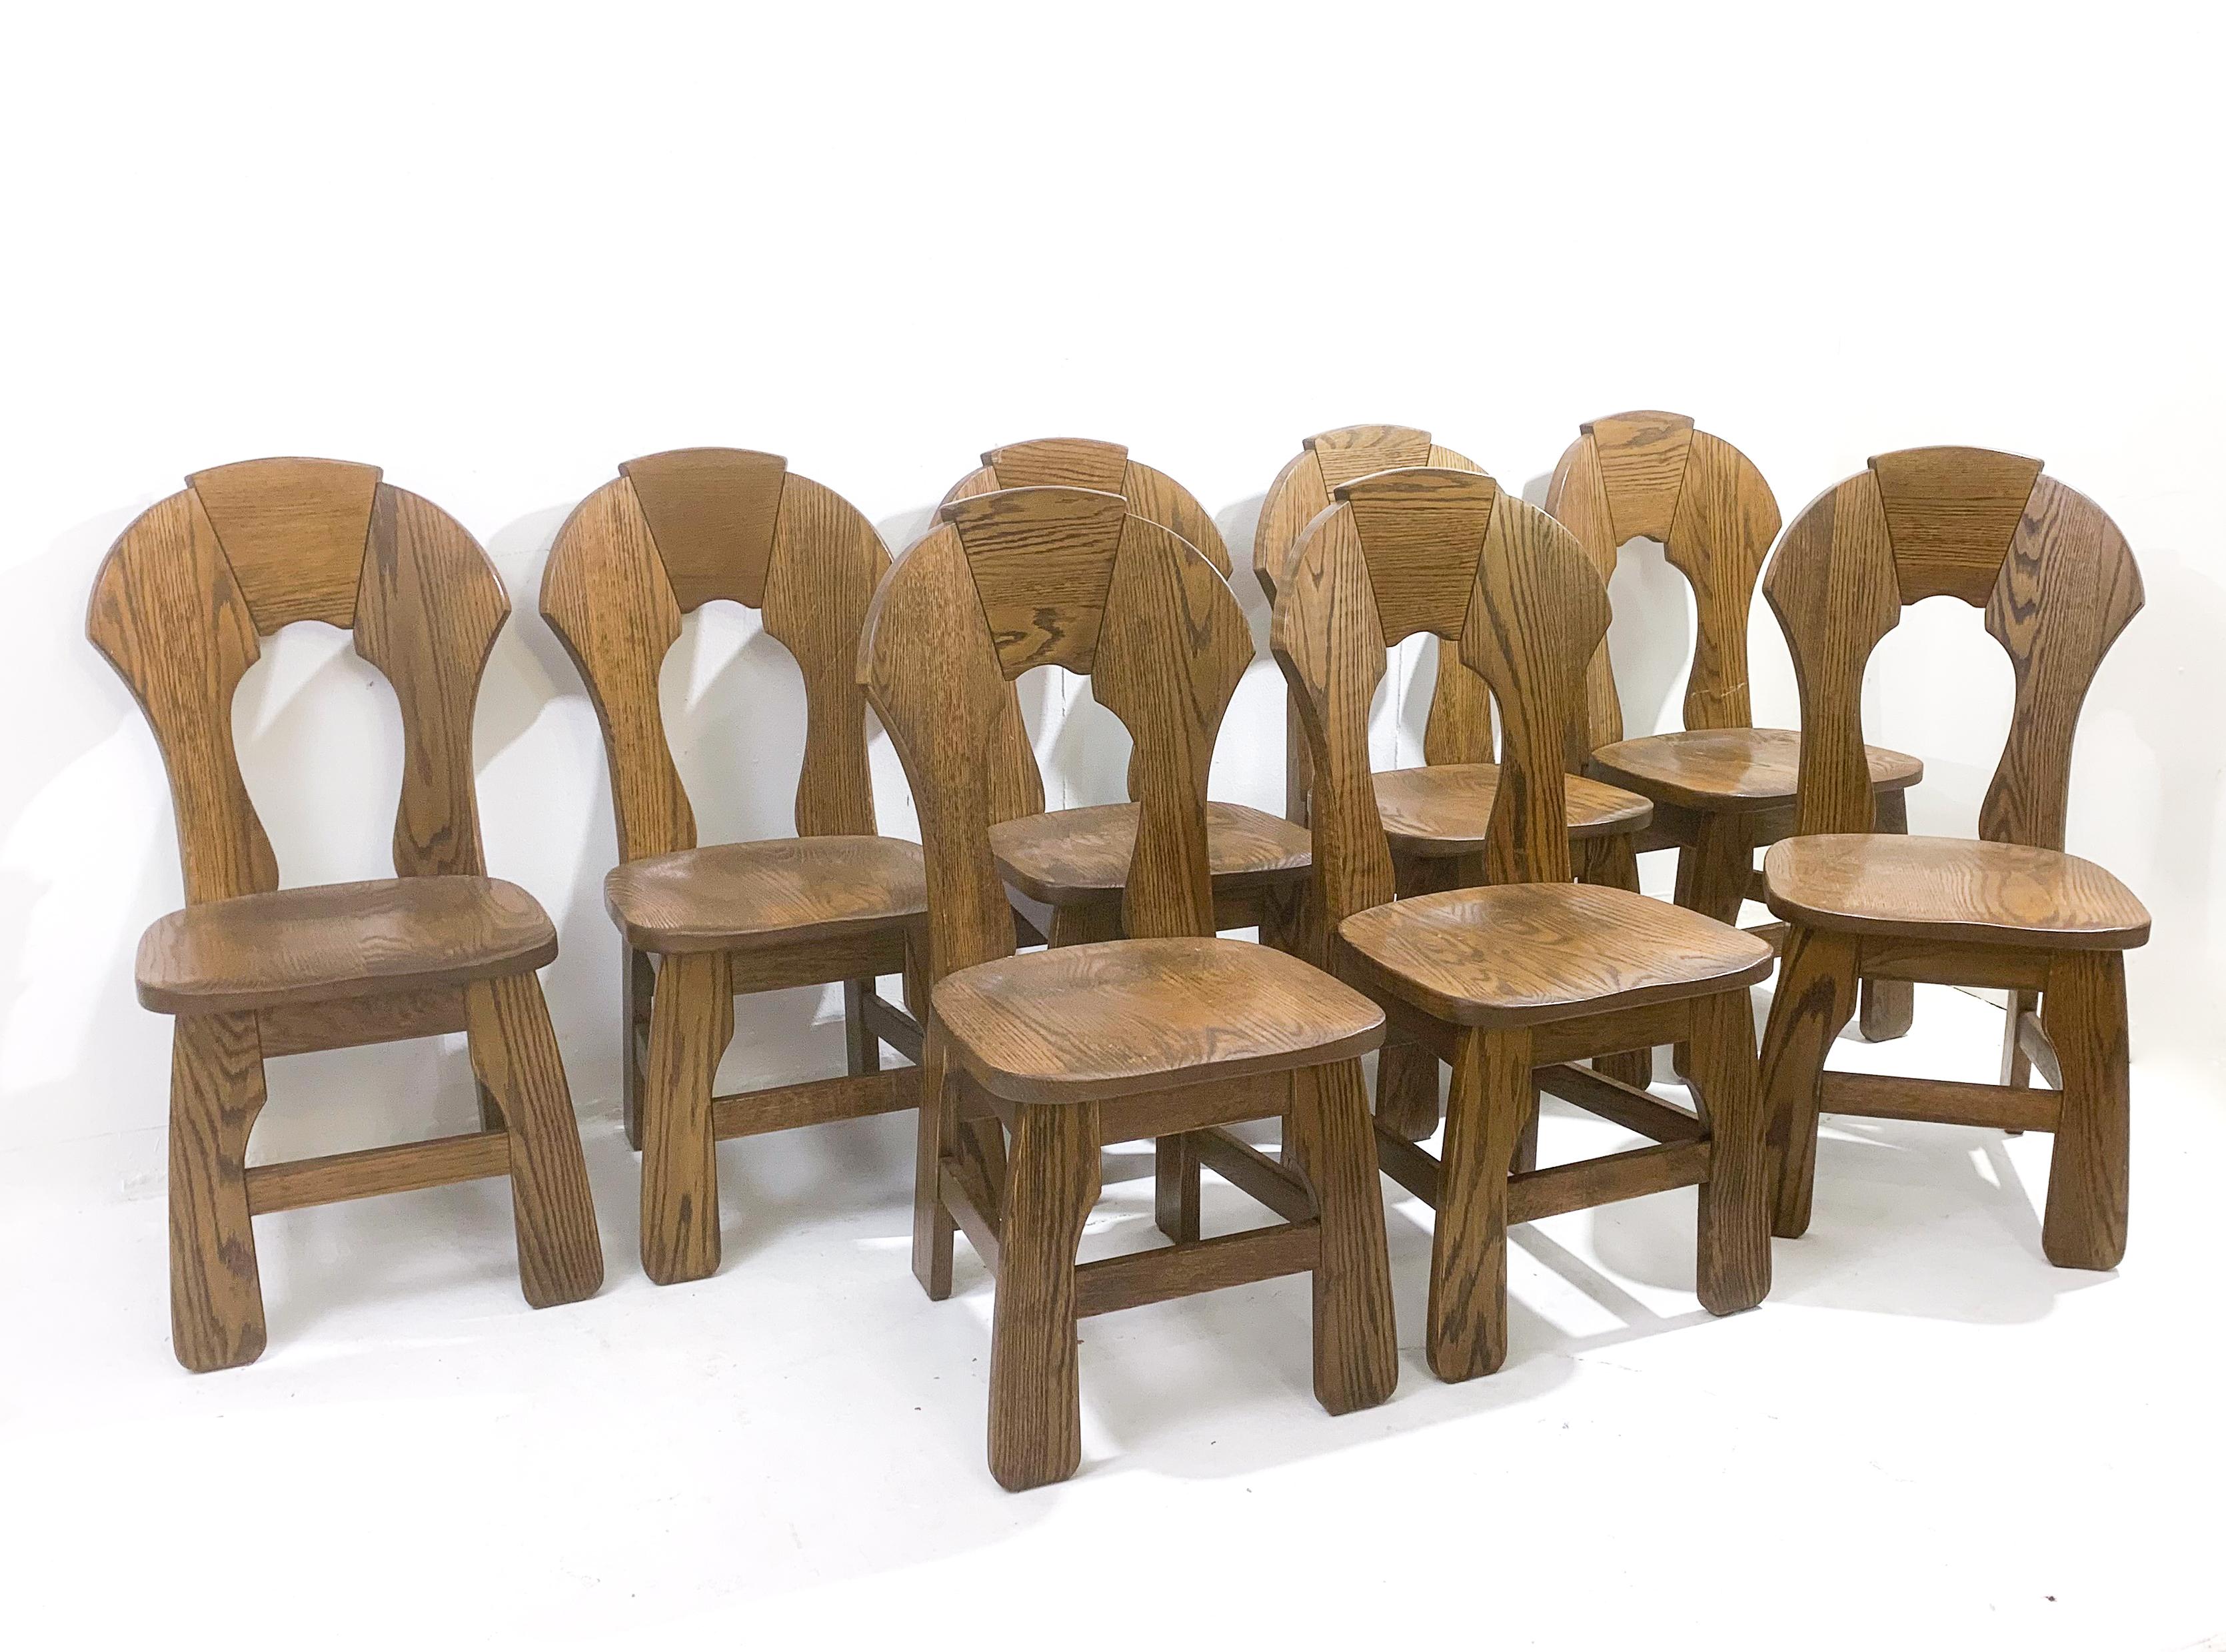 Mid-Century Modern Set of 8 Brutalist Wooden Chairs, Belgium, 1970s For Sale 3